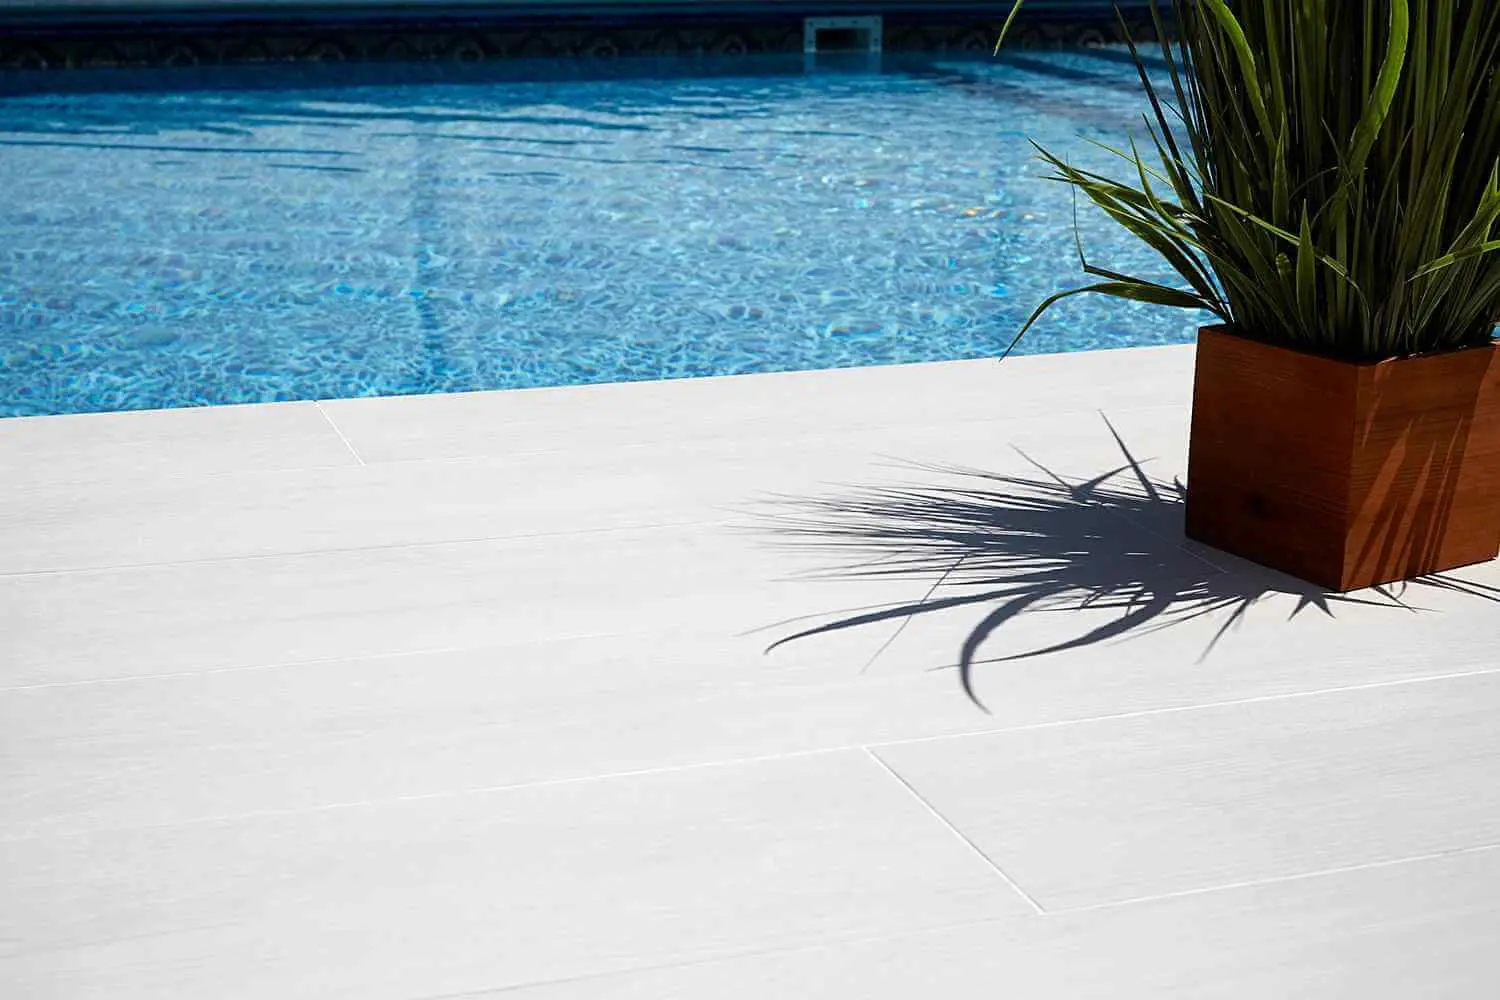 A serene view of a swimming pool with clear blue water. The poolside, designed by Reno Concrete Solutions, features light-colored tiles, and a wooden planter holding a leafy green plant casts a shadow on the ground, creating an inviting atmosphere.